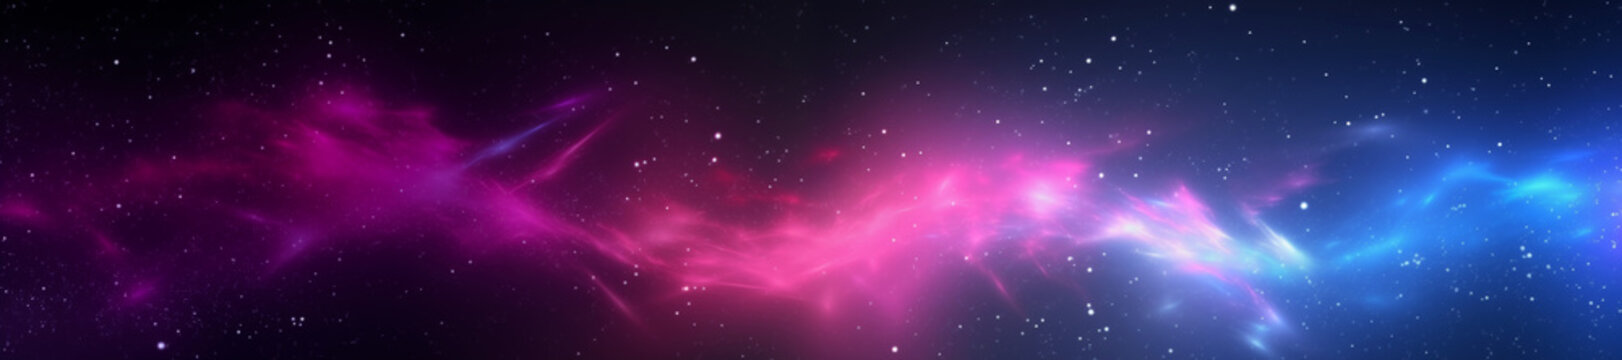 Abstract space background with stars, constellations and nebulae. Shining stars of the galaxy. Banner image.
